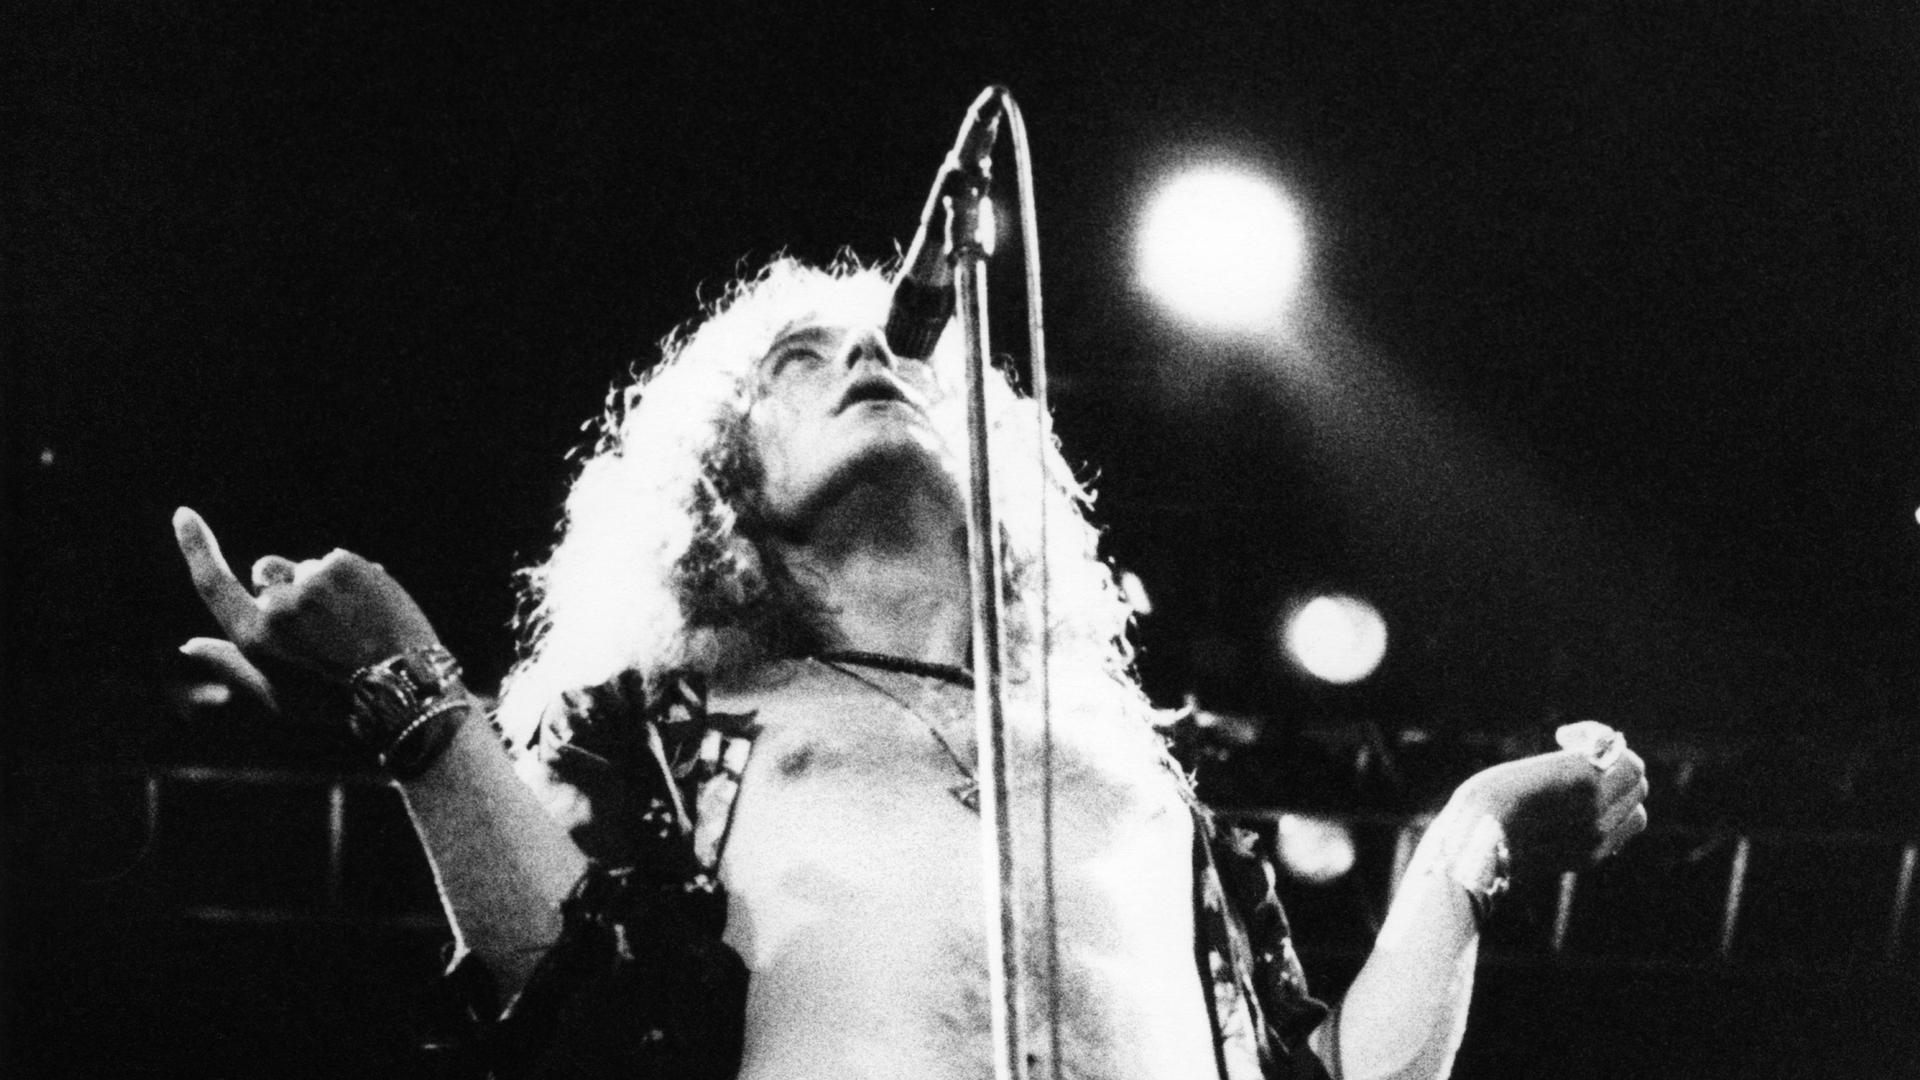 Robert Plant of Led Zeppelin performing "Stairway to Heaven" live onstage at Erals Court, 1975 in London.